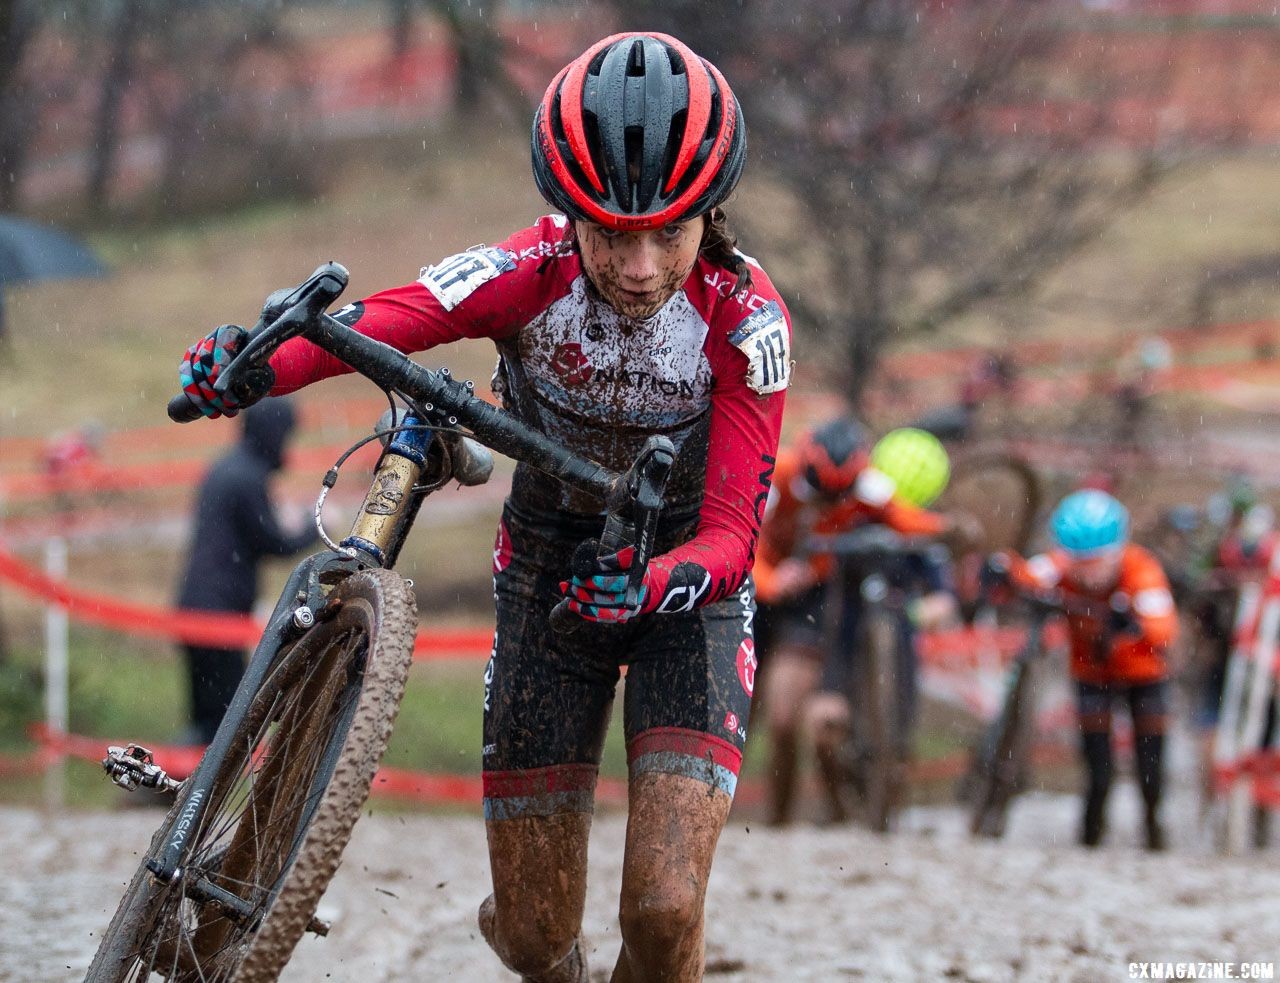 Vida Lopez de San Roman started in the back row but repeated her silver medal from Reno. Junior Women 13-14. 2018 Cyclocross National Championships, Louisville, KY. © A. Yee / Cyclocross Magazine